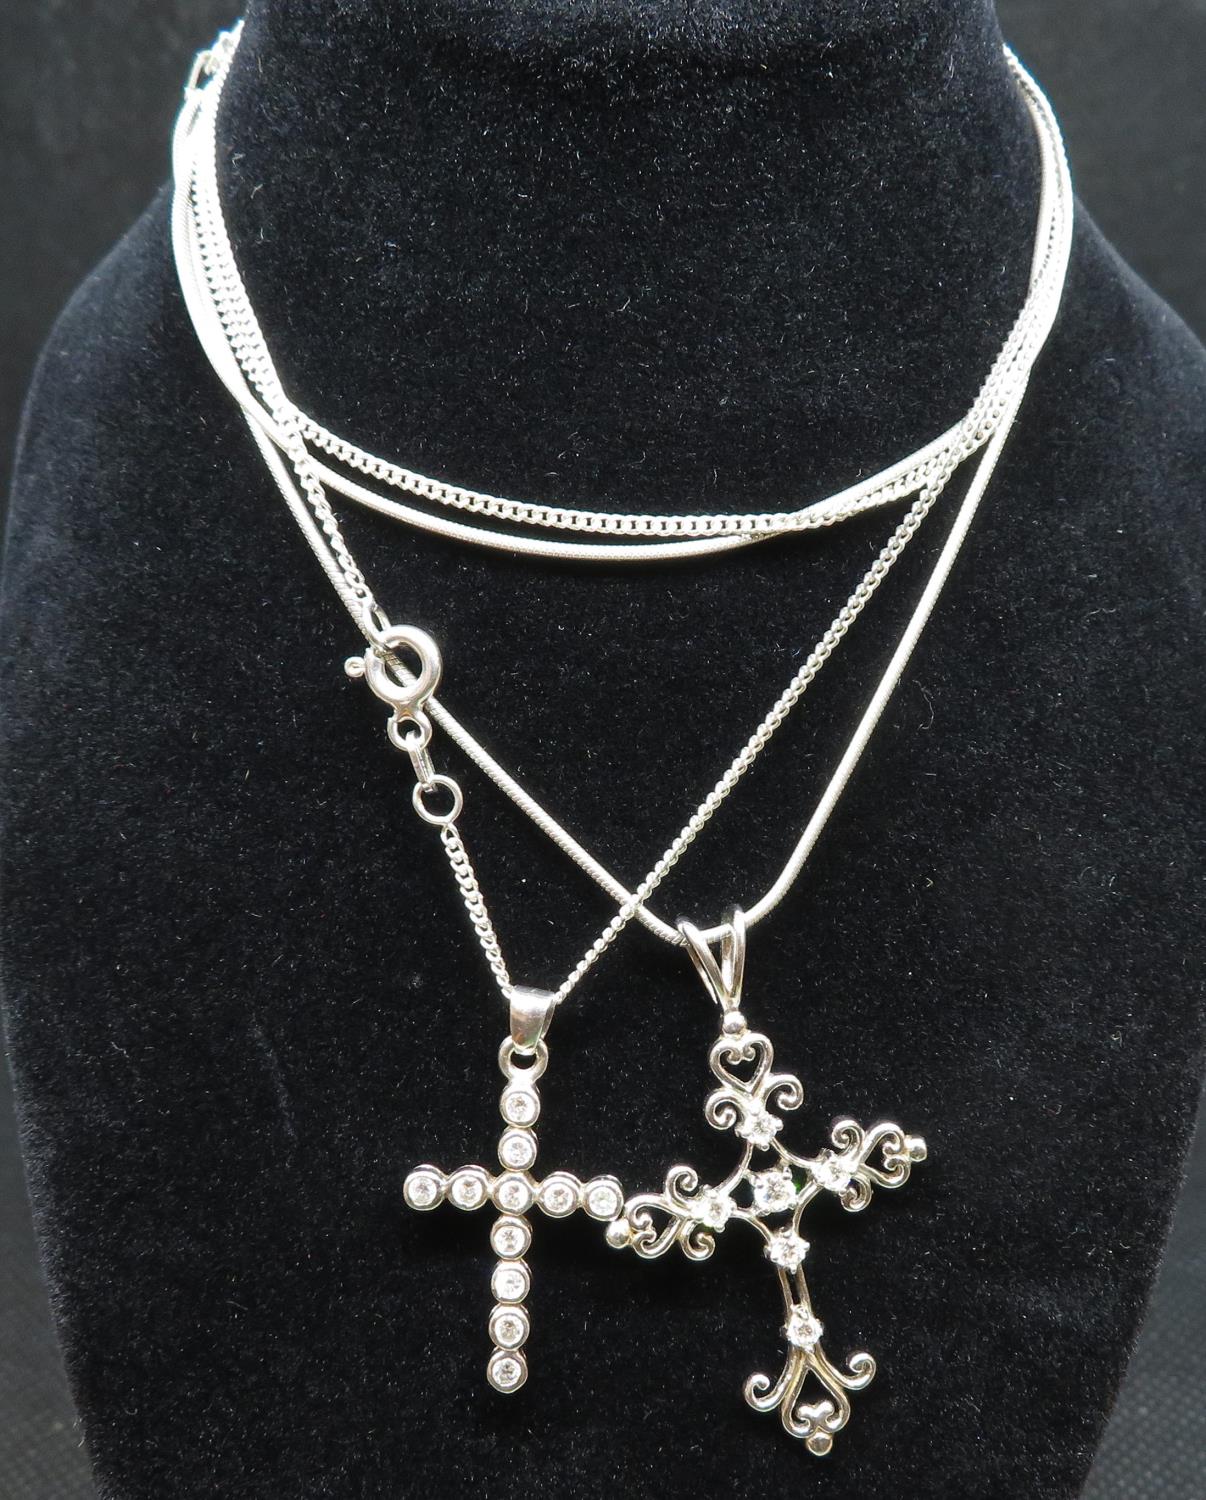 2 silver stone set crosses on 16" chains 7.5g